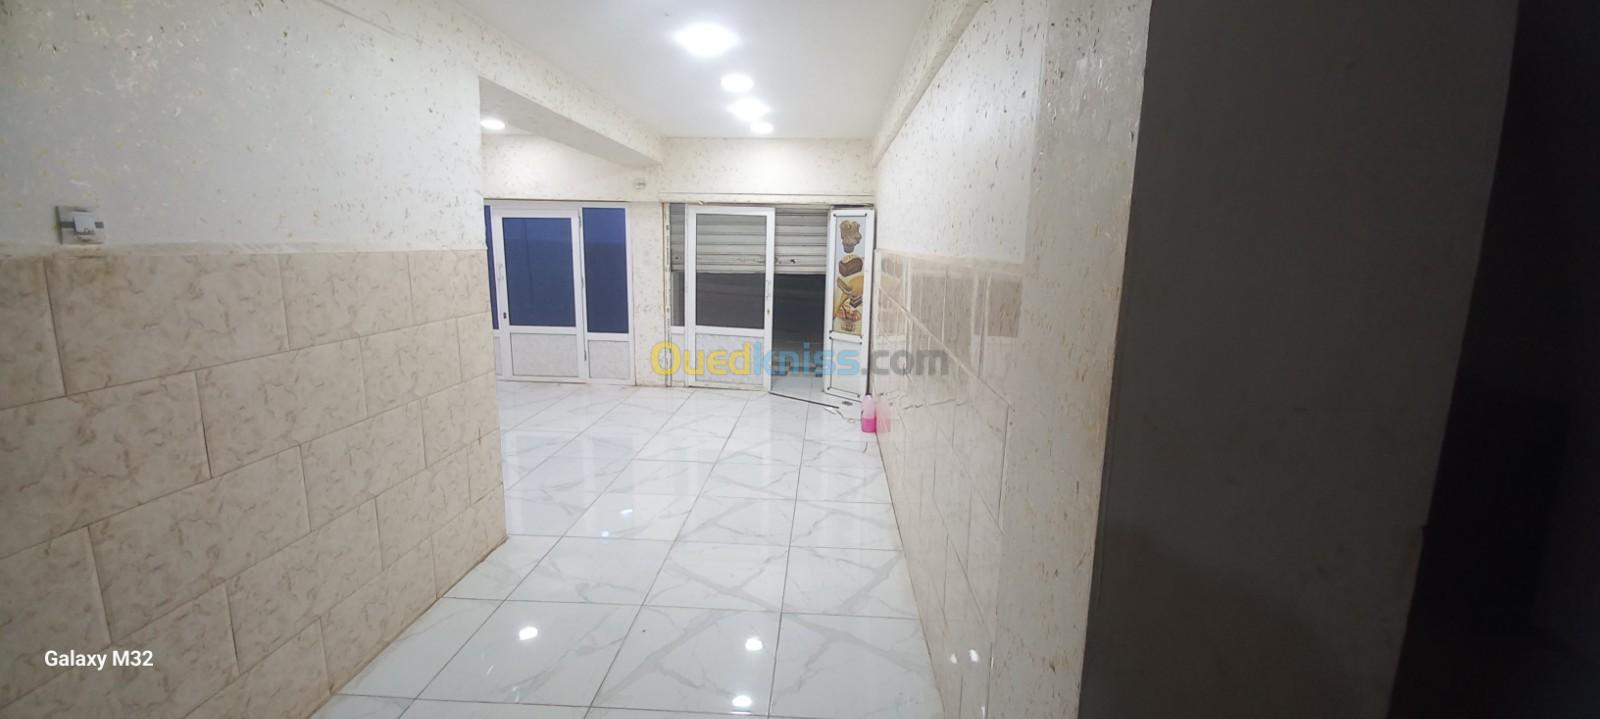 Location bien immobilier Chlef Chlef